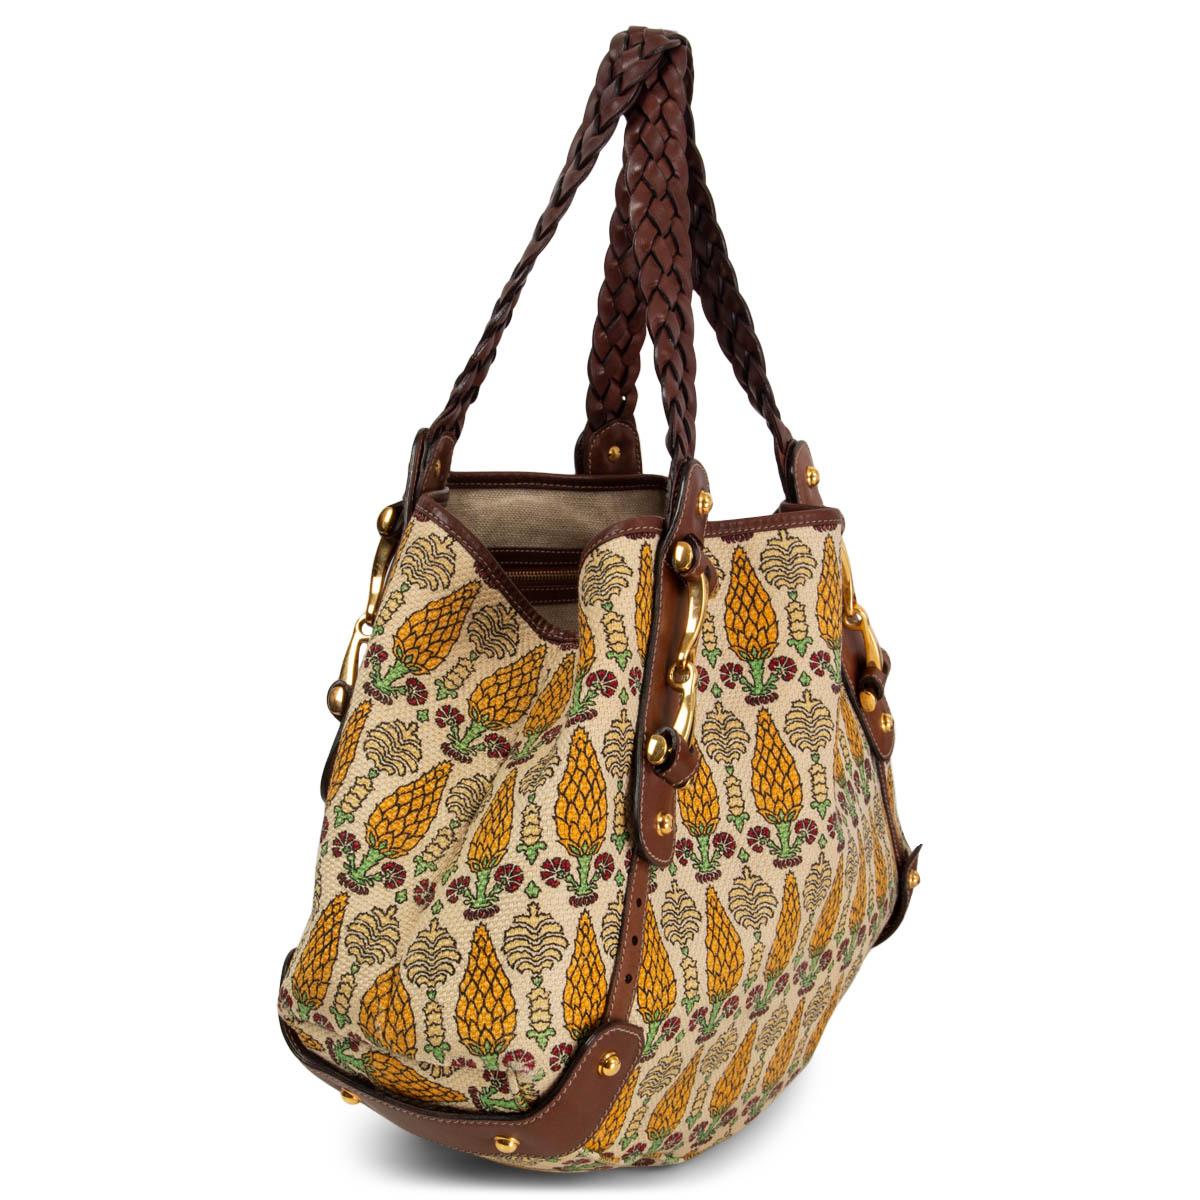 100% authentic Gucci Pelham 'Gucci Garden' shoulder bag in deep yellow, pale yellow, cream, green and red pigna printed canvas featuring brown leather trimming and braided shoulder-straps. Gold-tone metal hardware and horse-bit metal details. Has